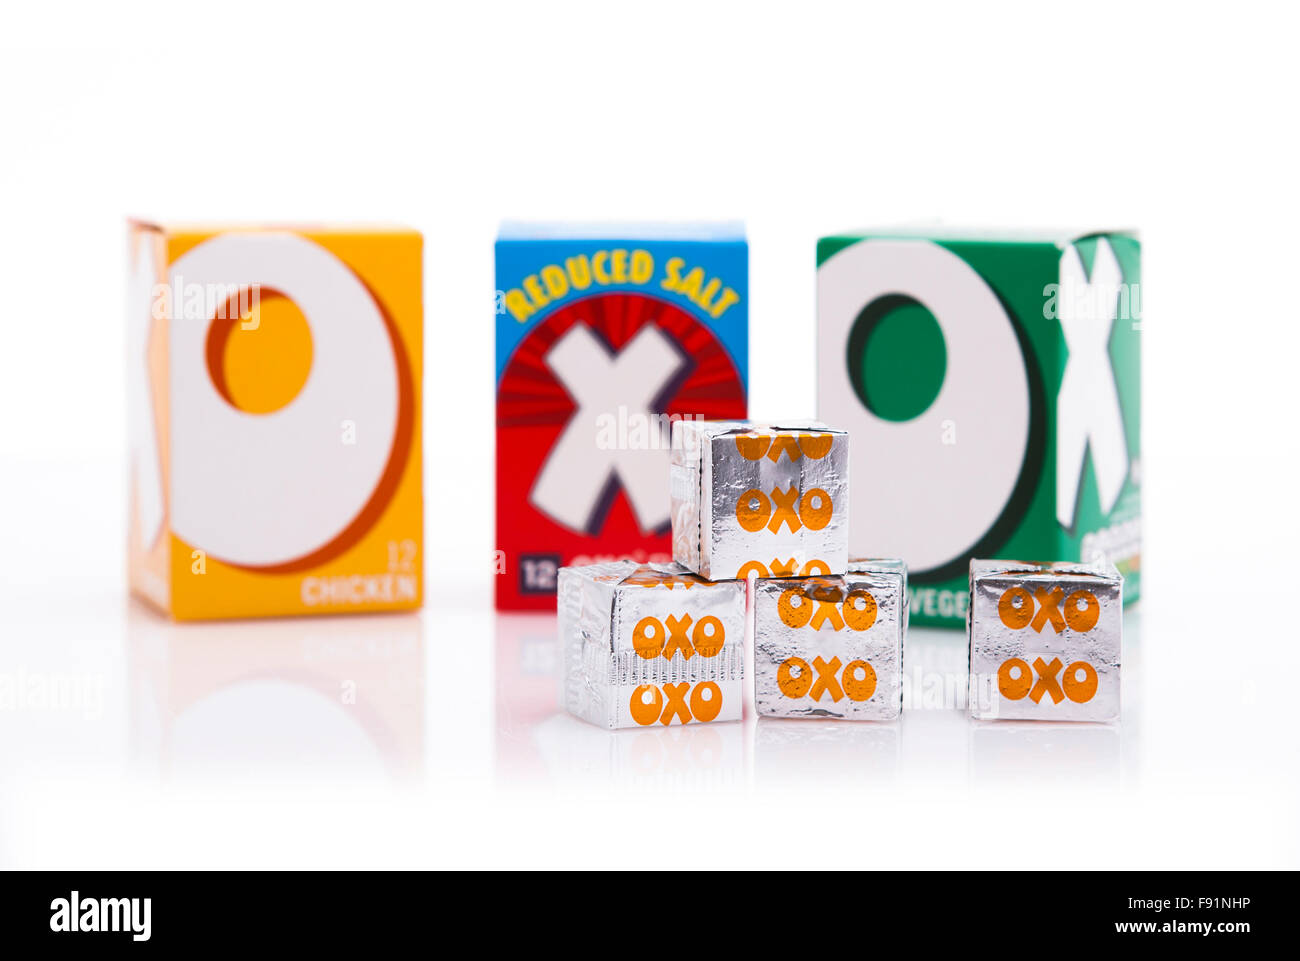 Beef, Vegetable And Chicken OXO cubes On A White Background, OXO Stock Photo